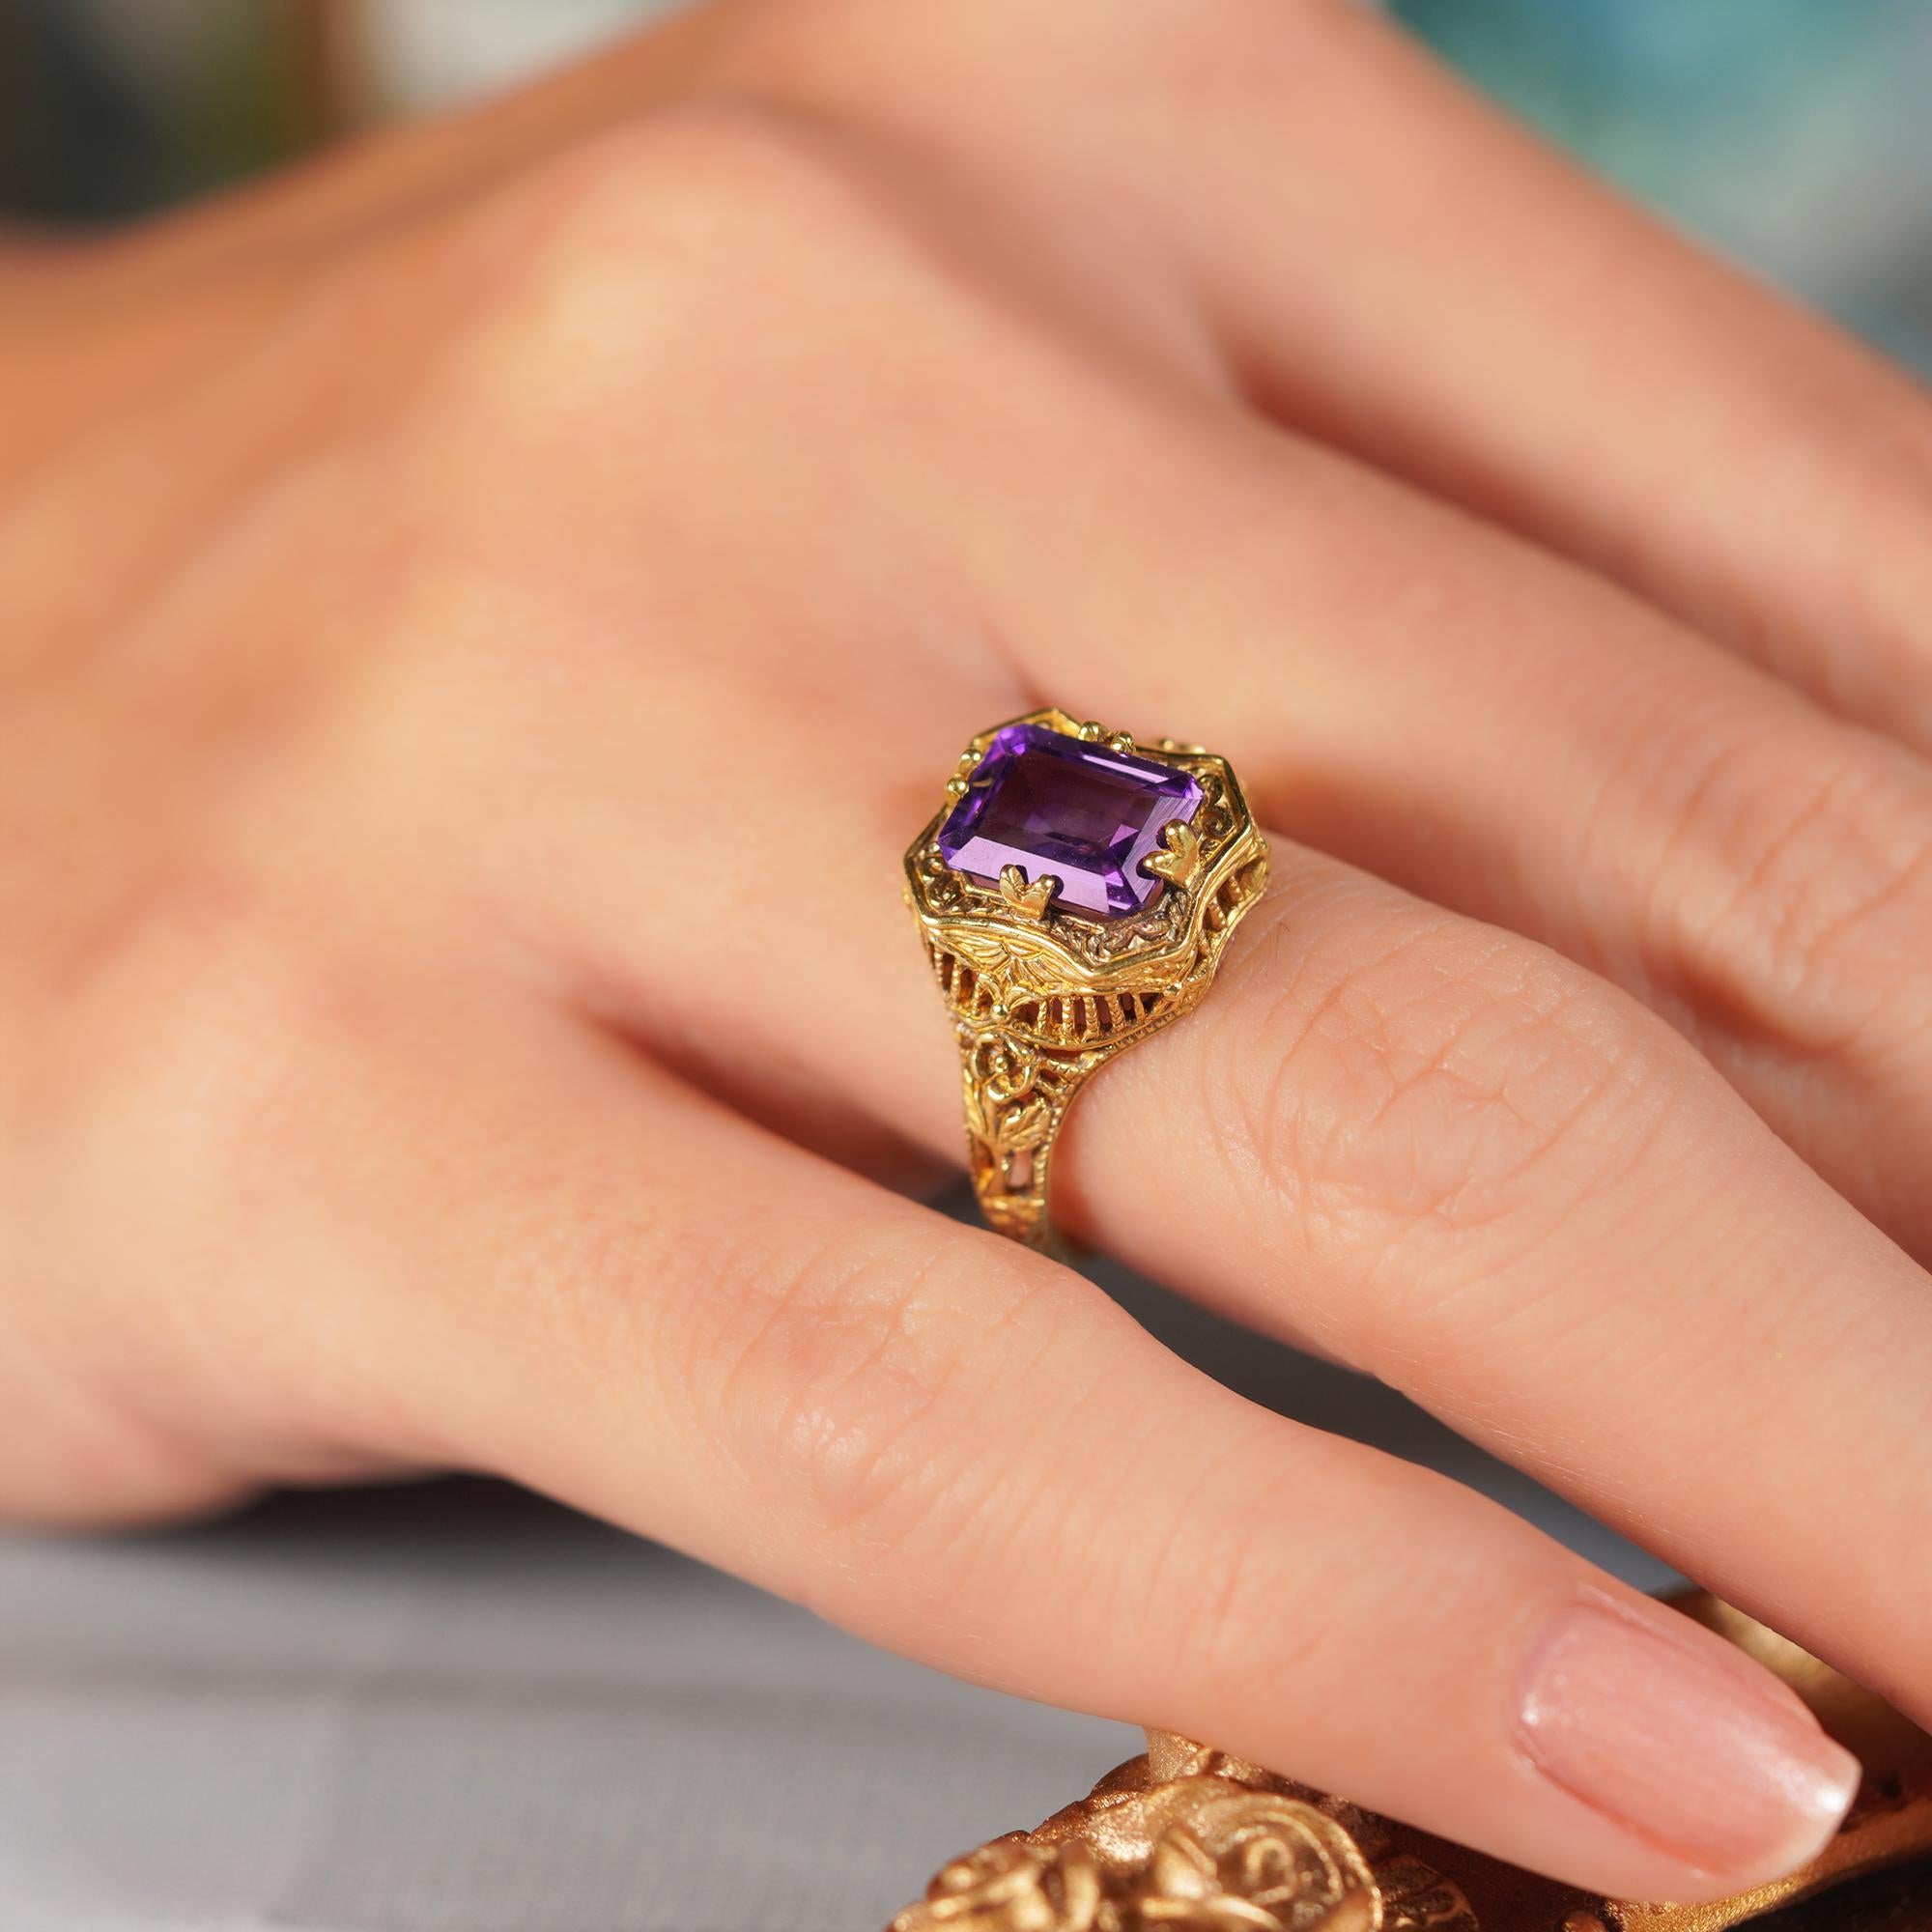 For Sale:  Natural Emerald Cut Amethyst Vintage Style Filigree Ring in Solid 9K Yellow Gold 7